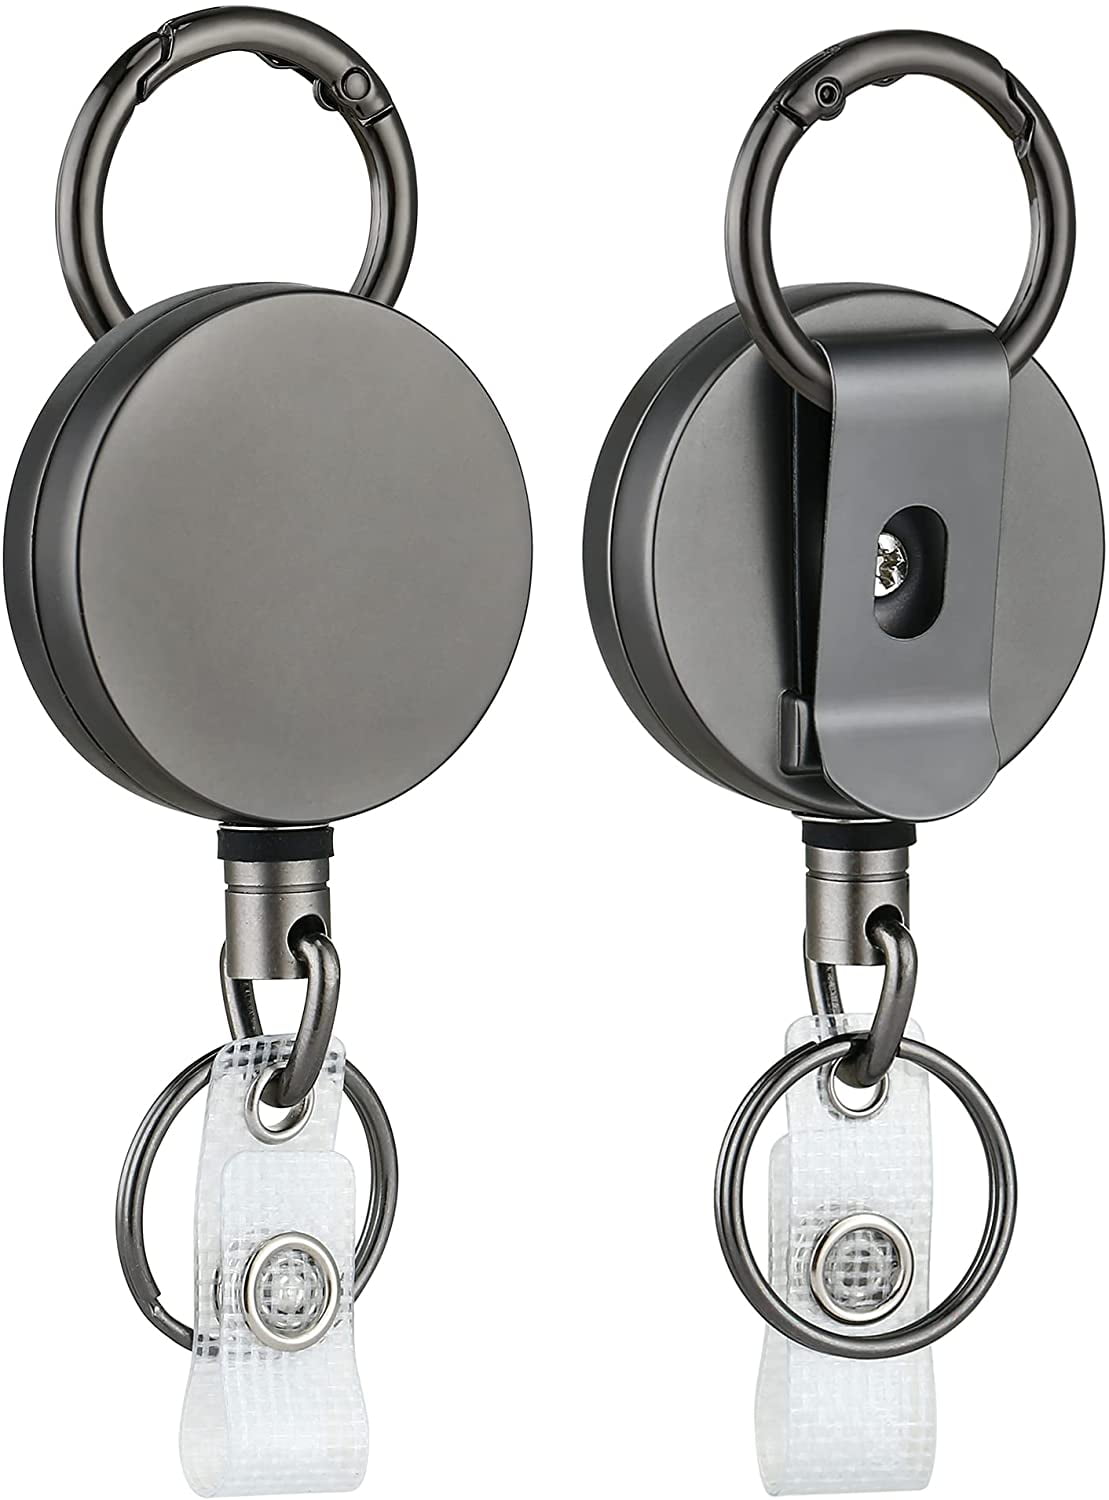 2 Pack Heavy Duty Retractable Badge Holder Reel, Will Well Metal ID Badge  Holder with Belt Clip Key Ring for Name Card Keychain [All Metal Casing,  27.5 UHMWPE Fiber Cord, Reinforced Id